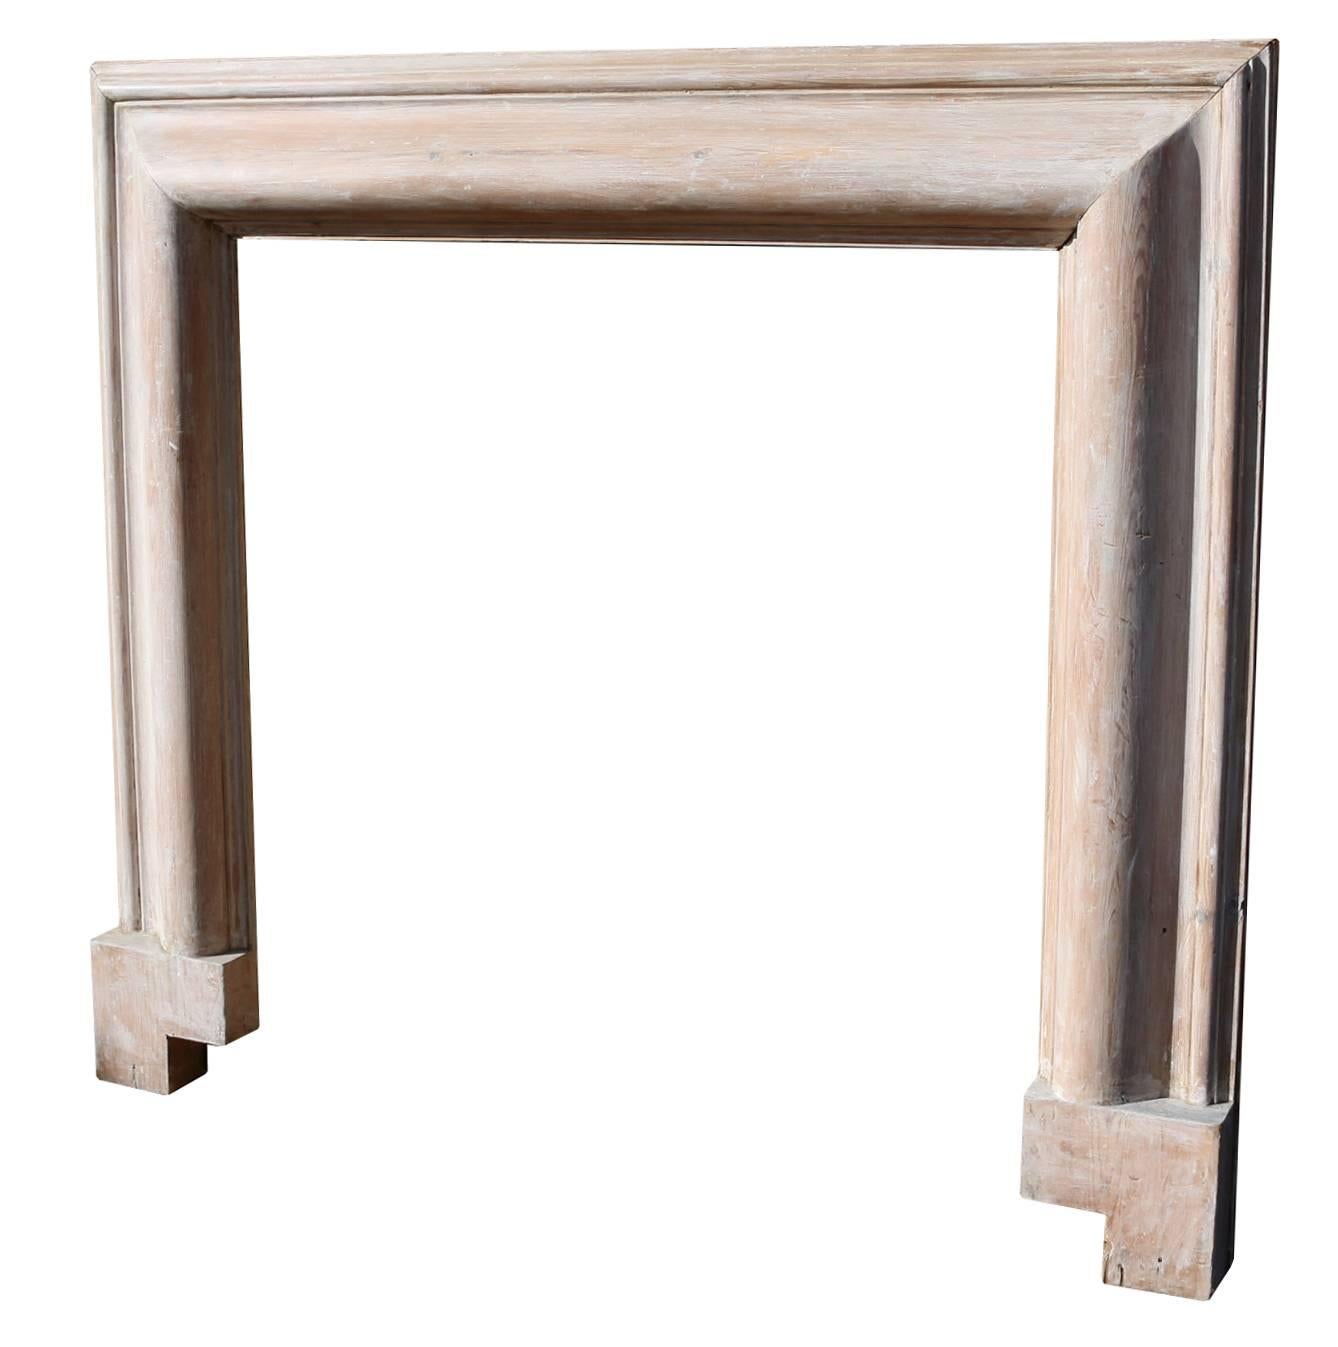 This fire surround has a painted wash finish.
Measure: Opening height 85.5 cm
Opening width 79 cm
Weight 10 kg.